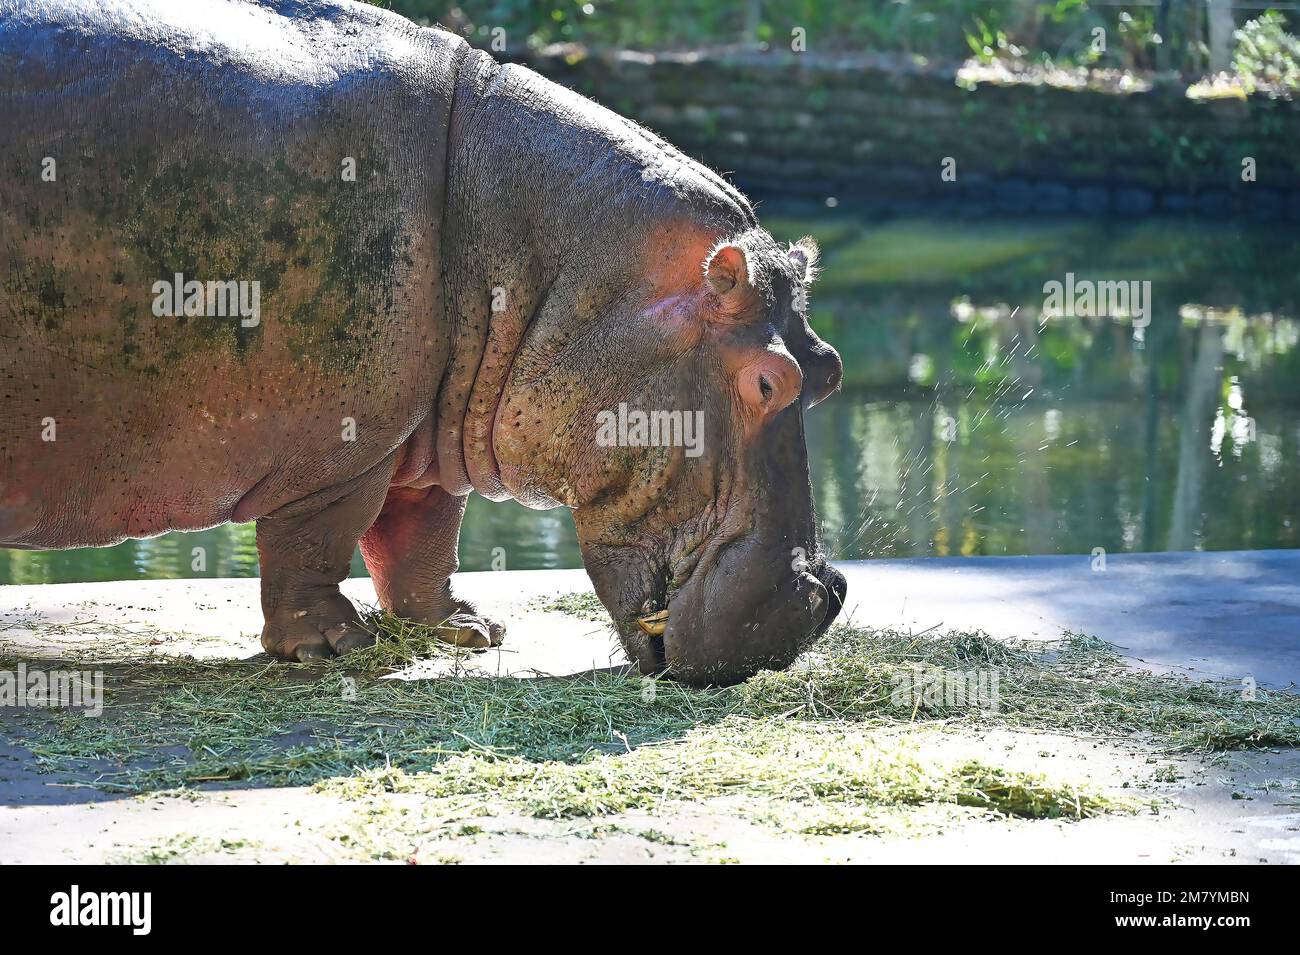 Homosassa Springs offers visitors a variety of animal and birdlife in a beautiful outdoor setting. The hippo sneezes! Stock Photo